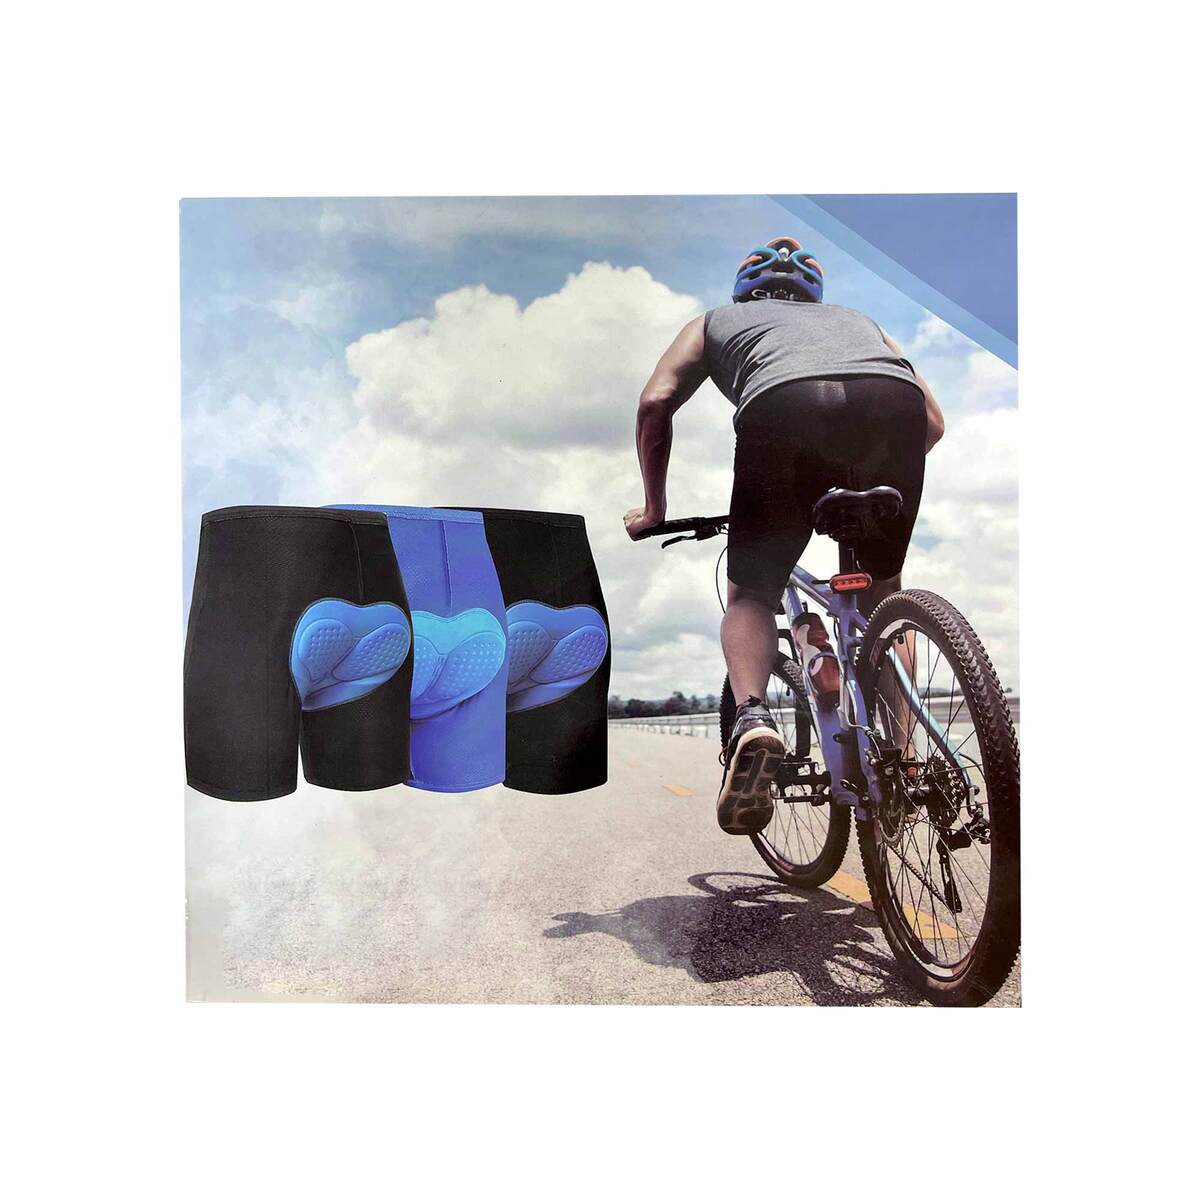 Sports Champion Cycling Shorts YJ-8014 XXL, Assorted Colors, Per pc